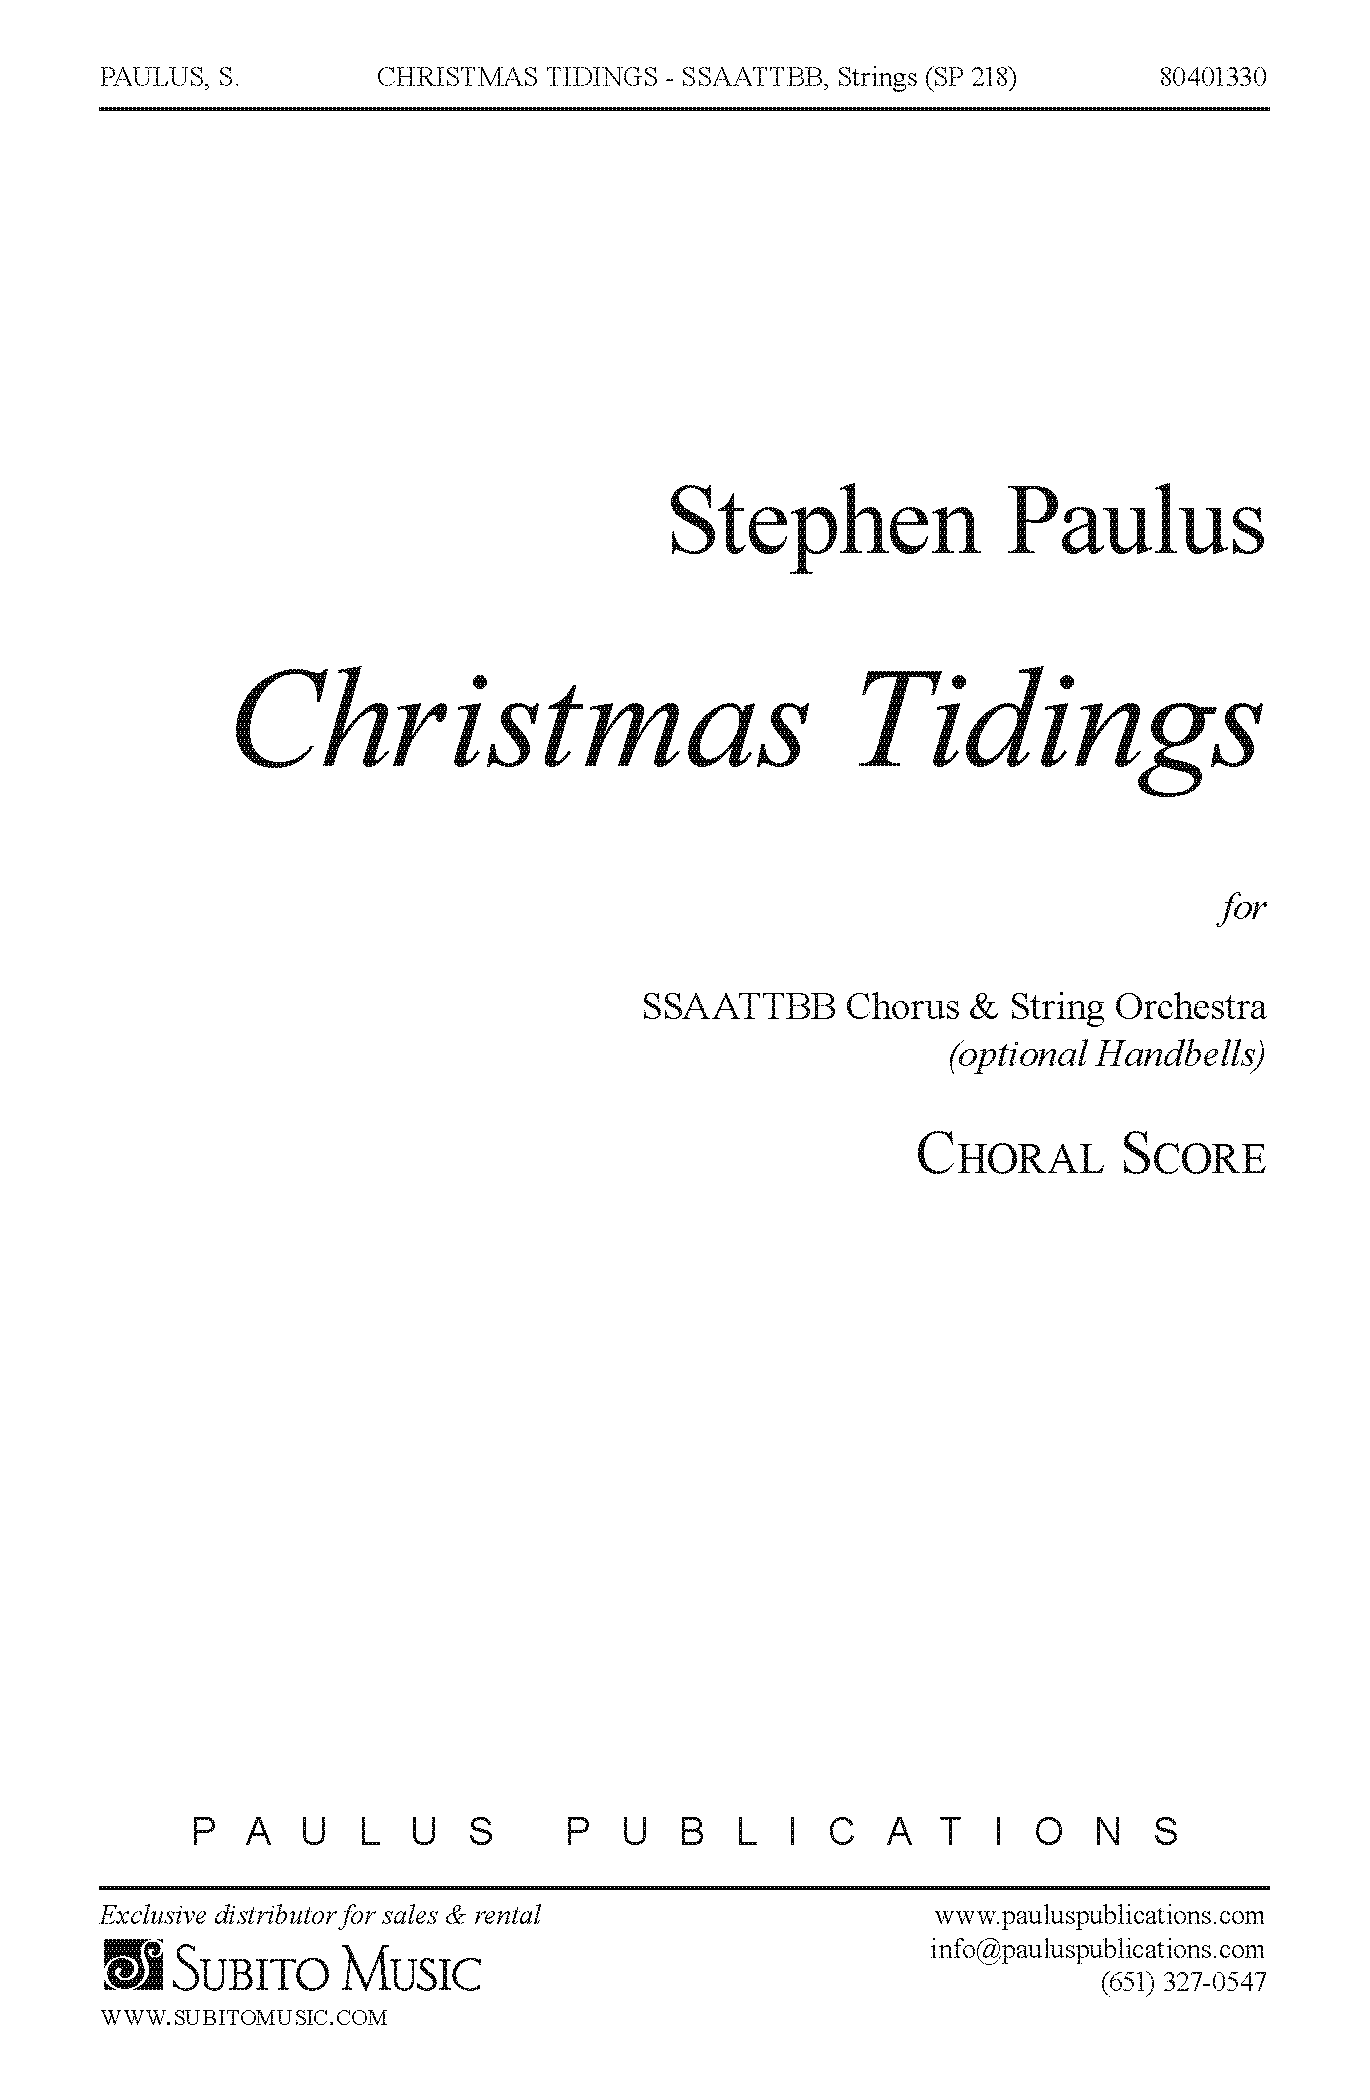 Christmas Tidings for SSAATTBB Chorus & String Orchestra